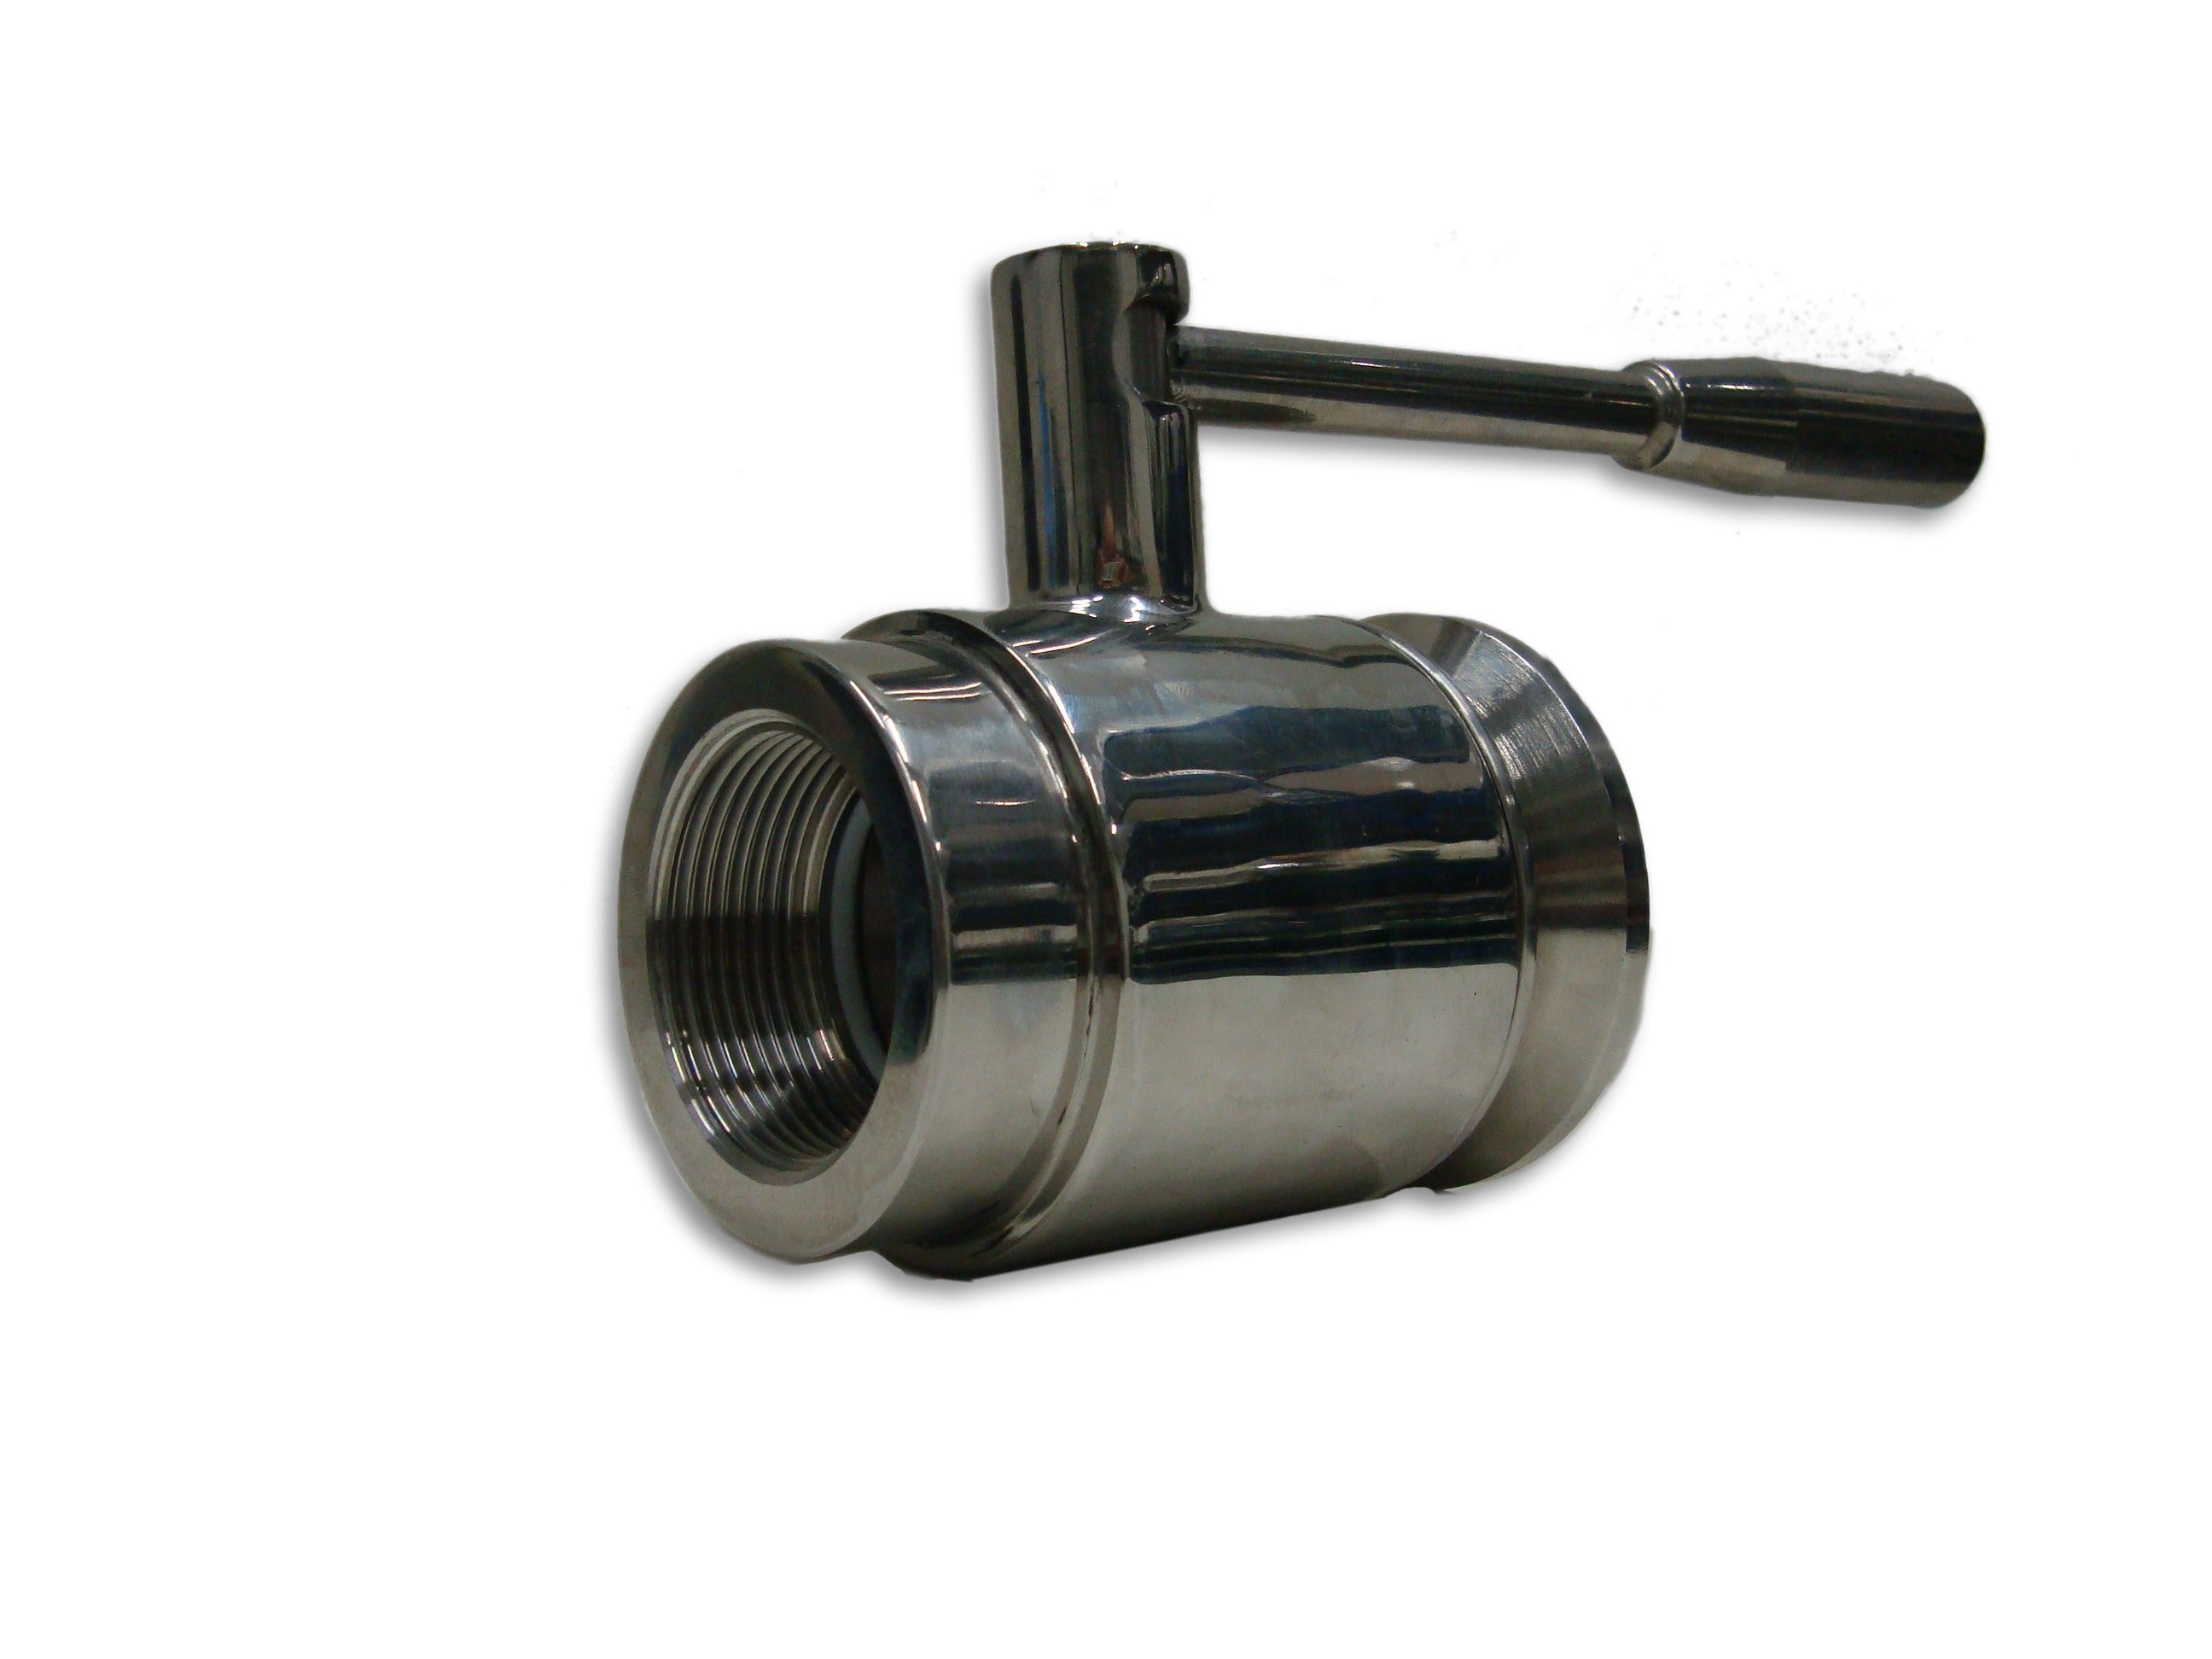 Stainless steel ball valve 1"1/2 with connection 50 garolla